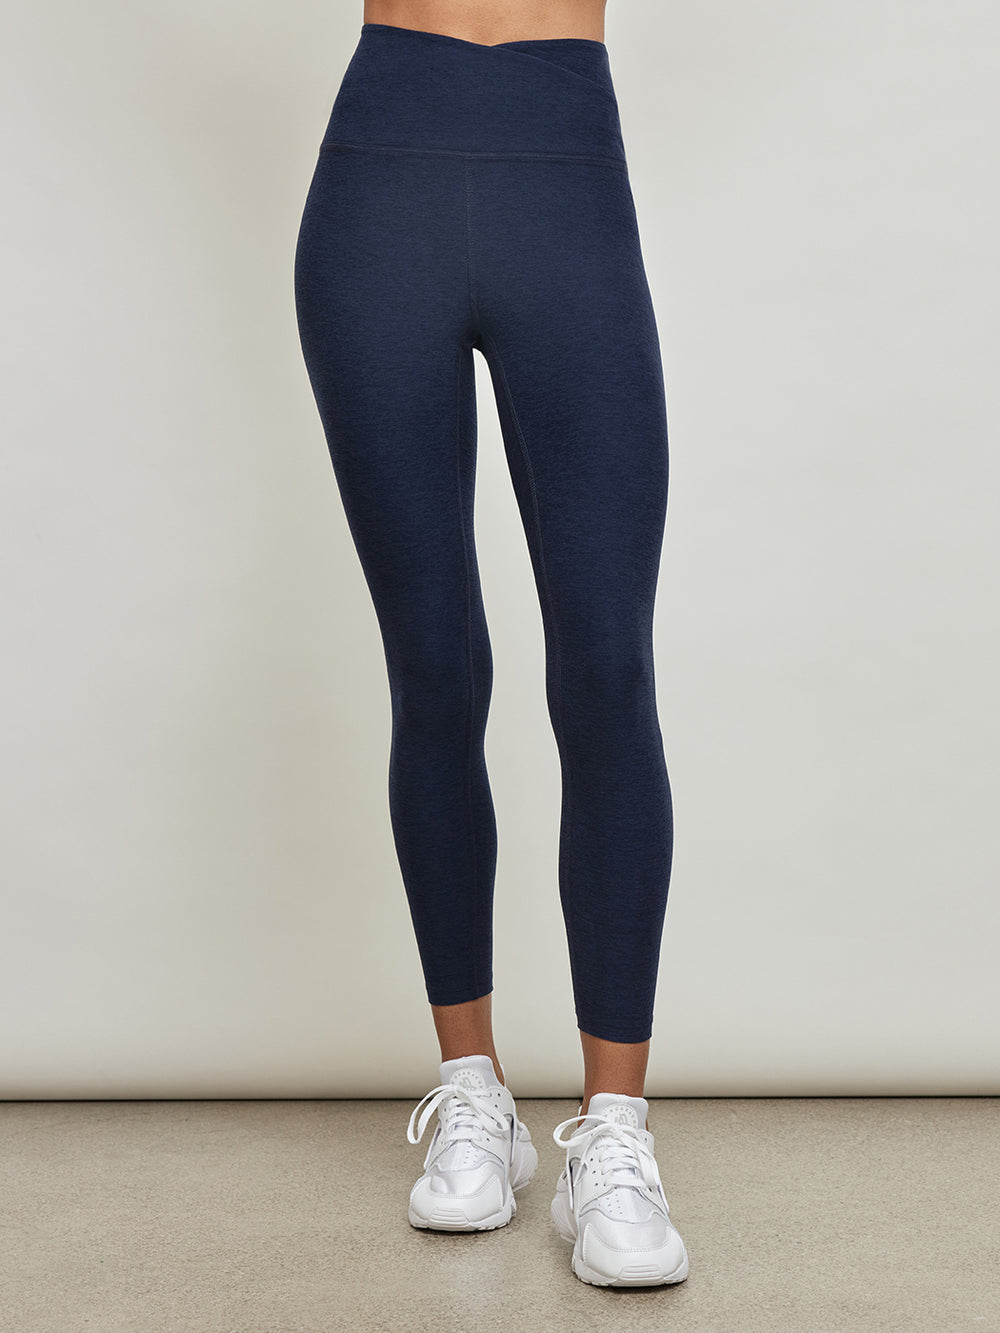 NEW - Beyond Yoga Spacedye At Your Leisure High Waisted Legging in